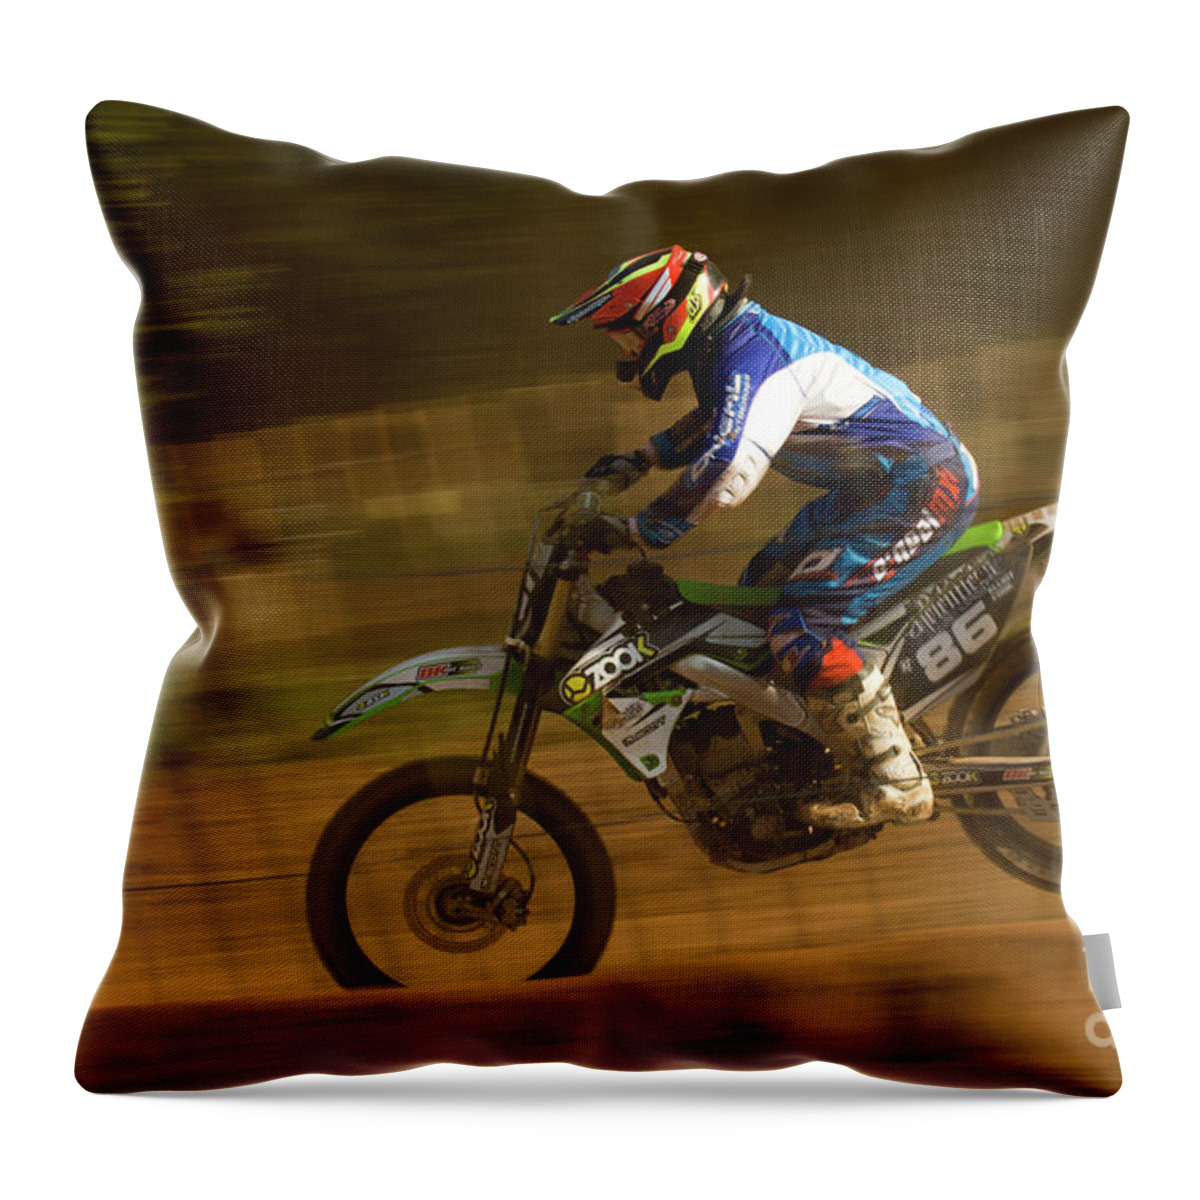  Throw Pillow featuring the photograph Motocross #1 by Ang El